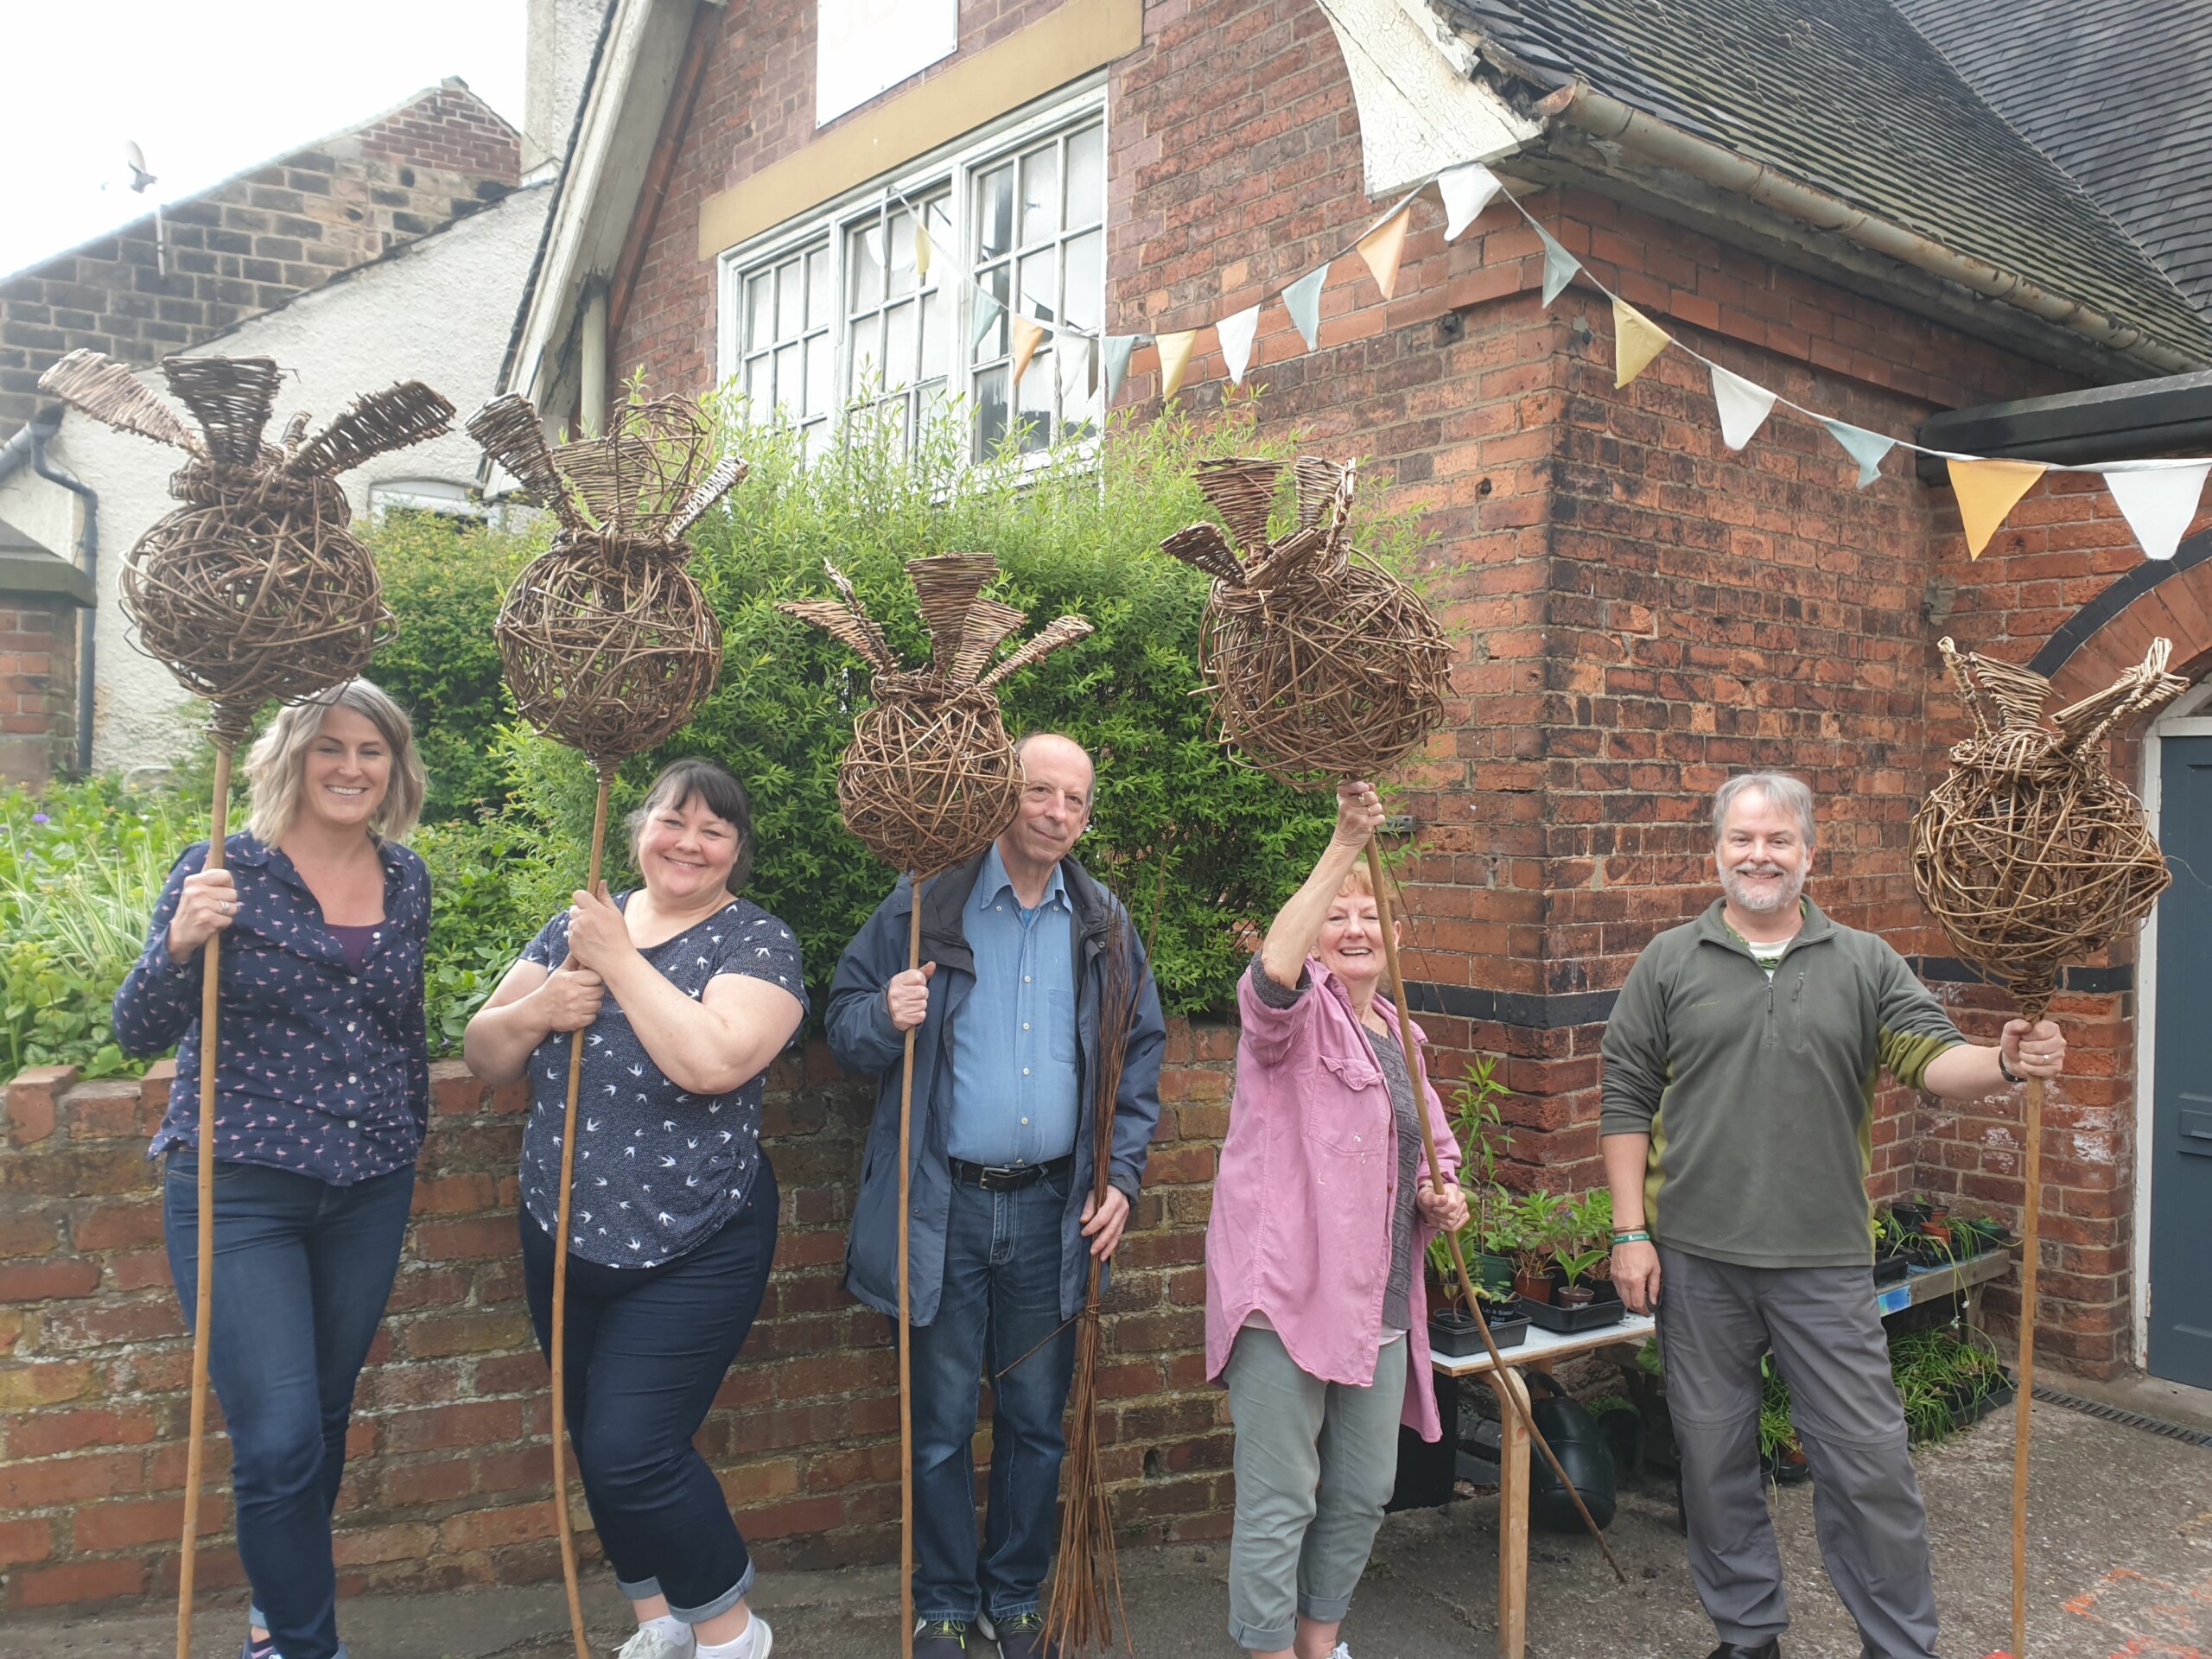 Willow sculpture workshop – giant poppy seed heads